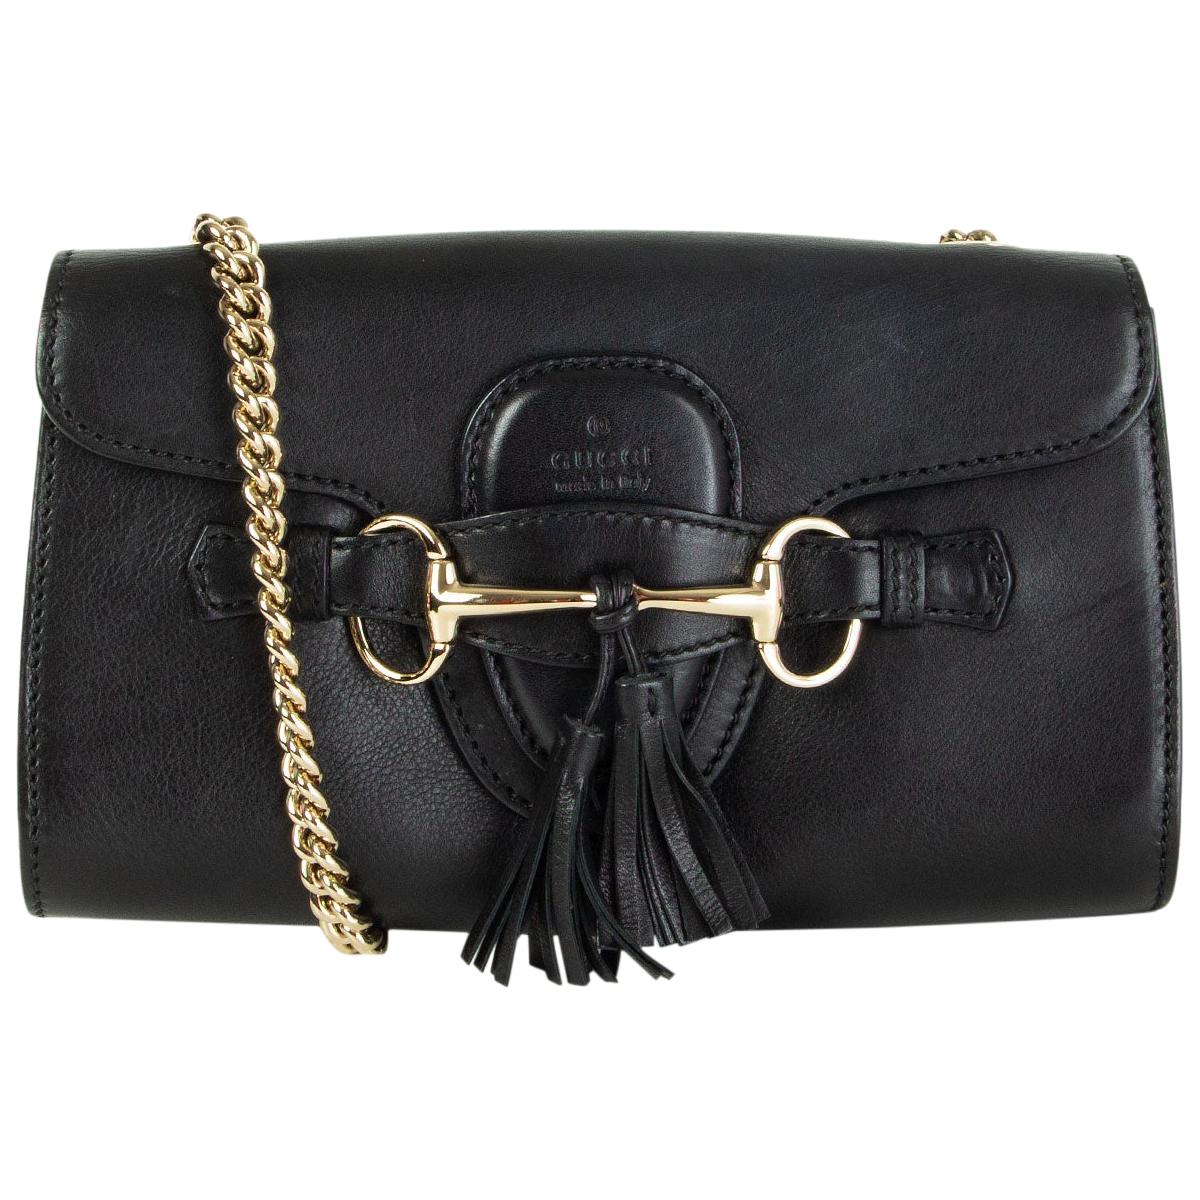 GUCCI black smooth leather EMILY SMALL CHAIN Shoulder Bag